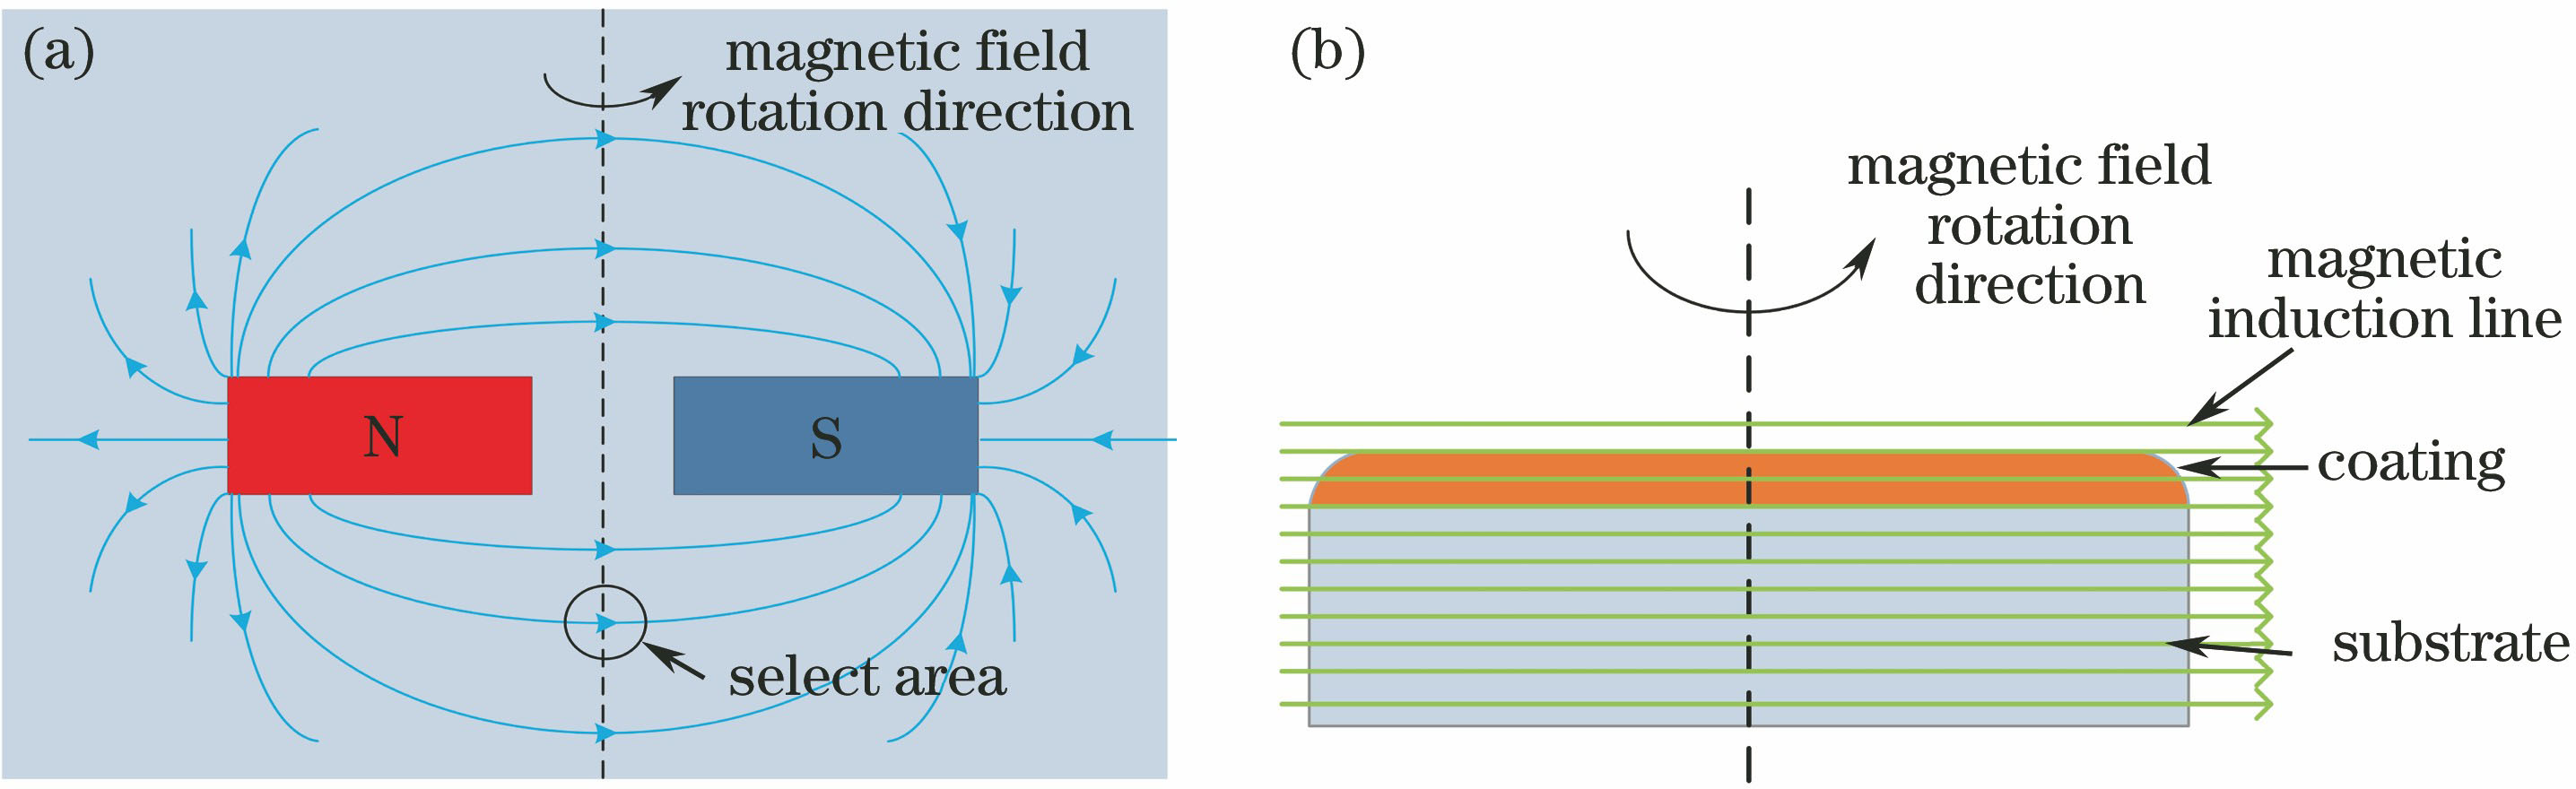 Schematic of magnetic field distribution. (a) Magnetic induction line distribution; (b) magnetic field distribution within workpiece